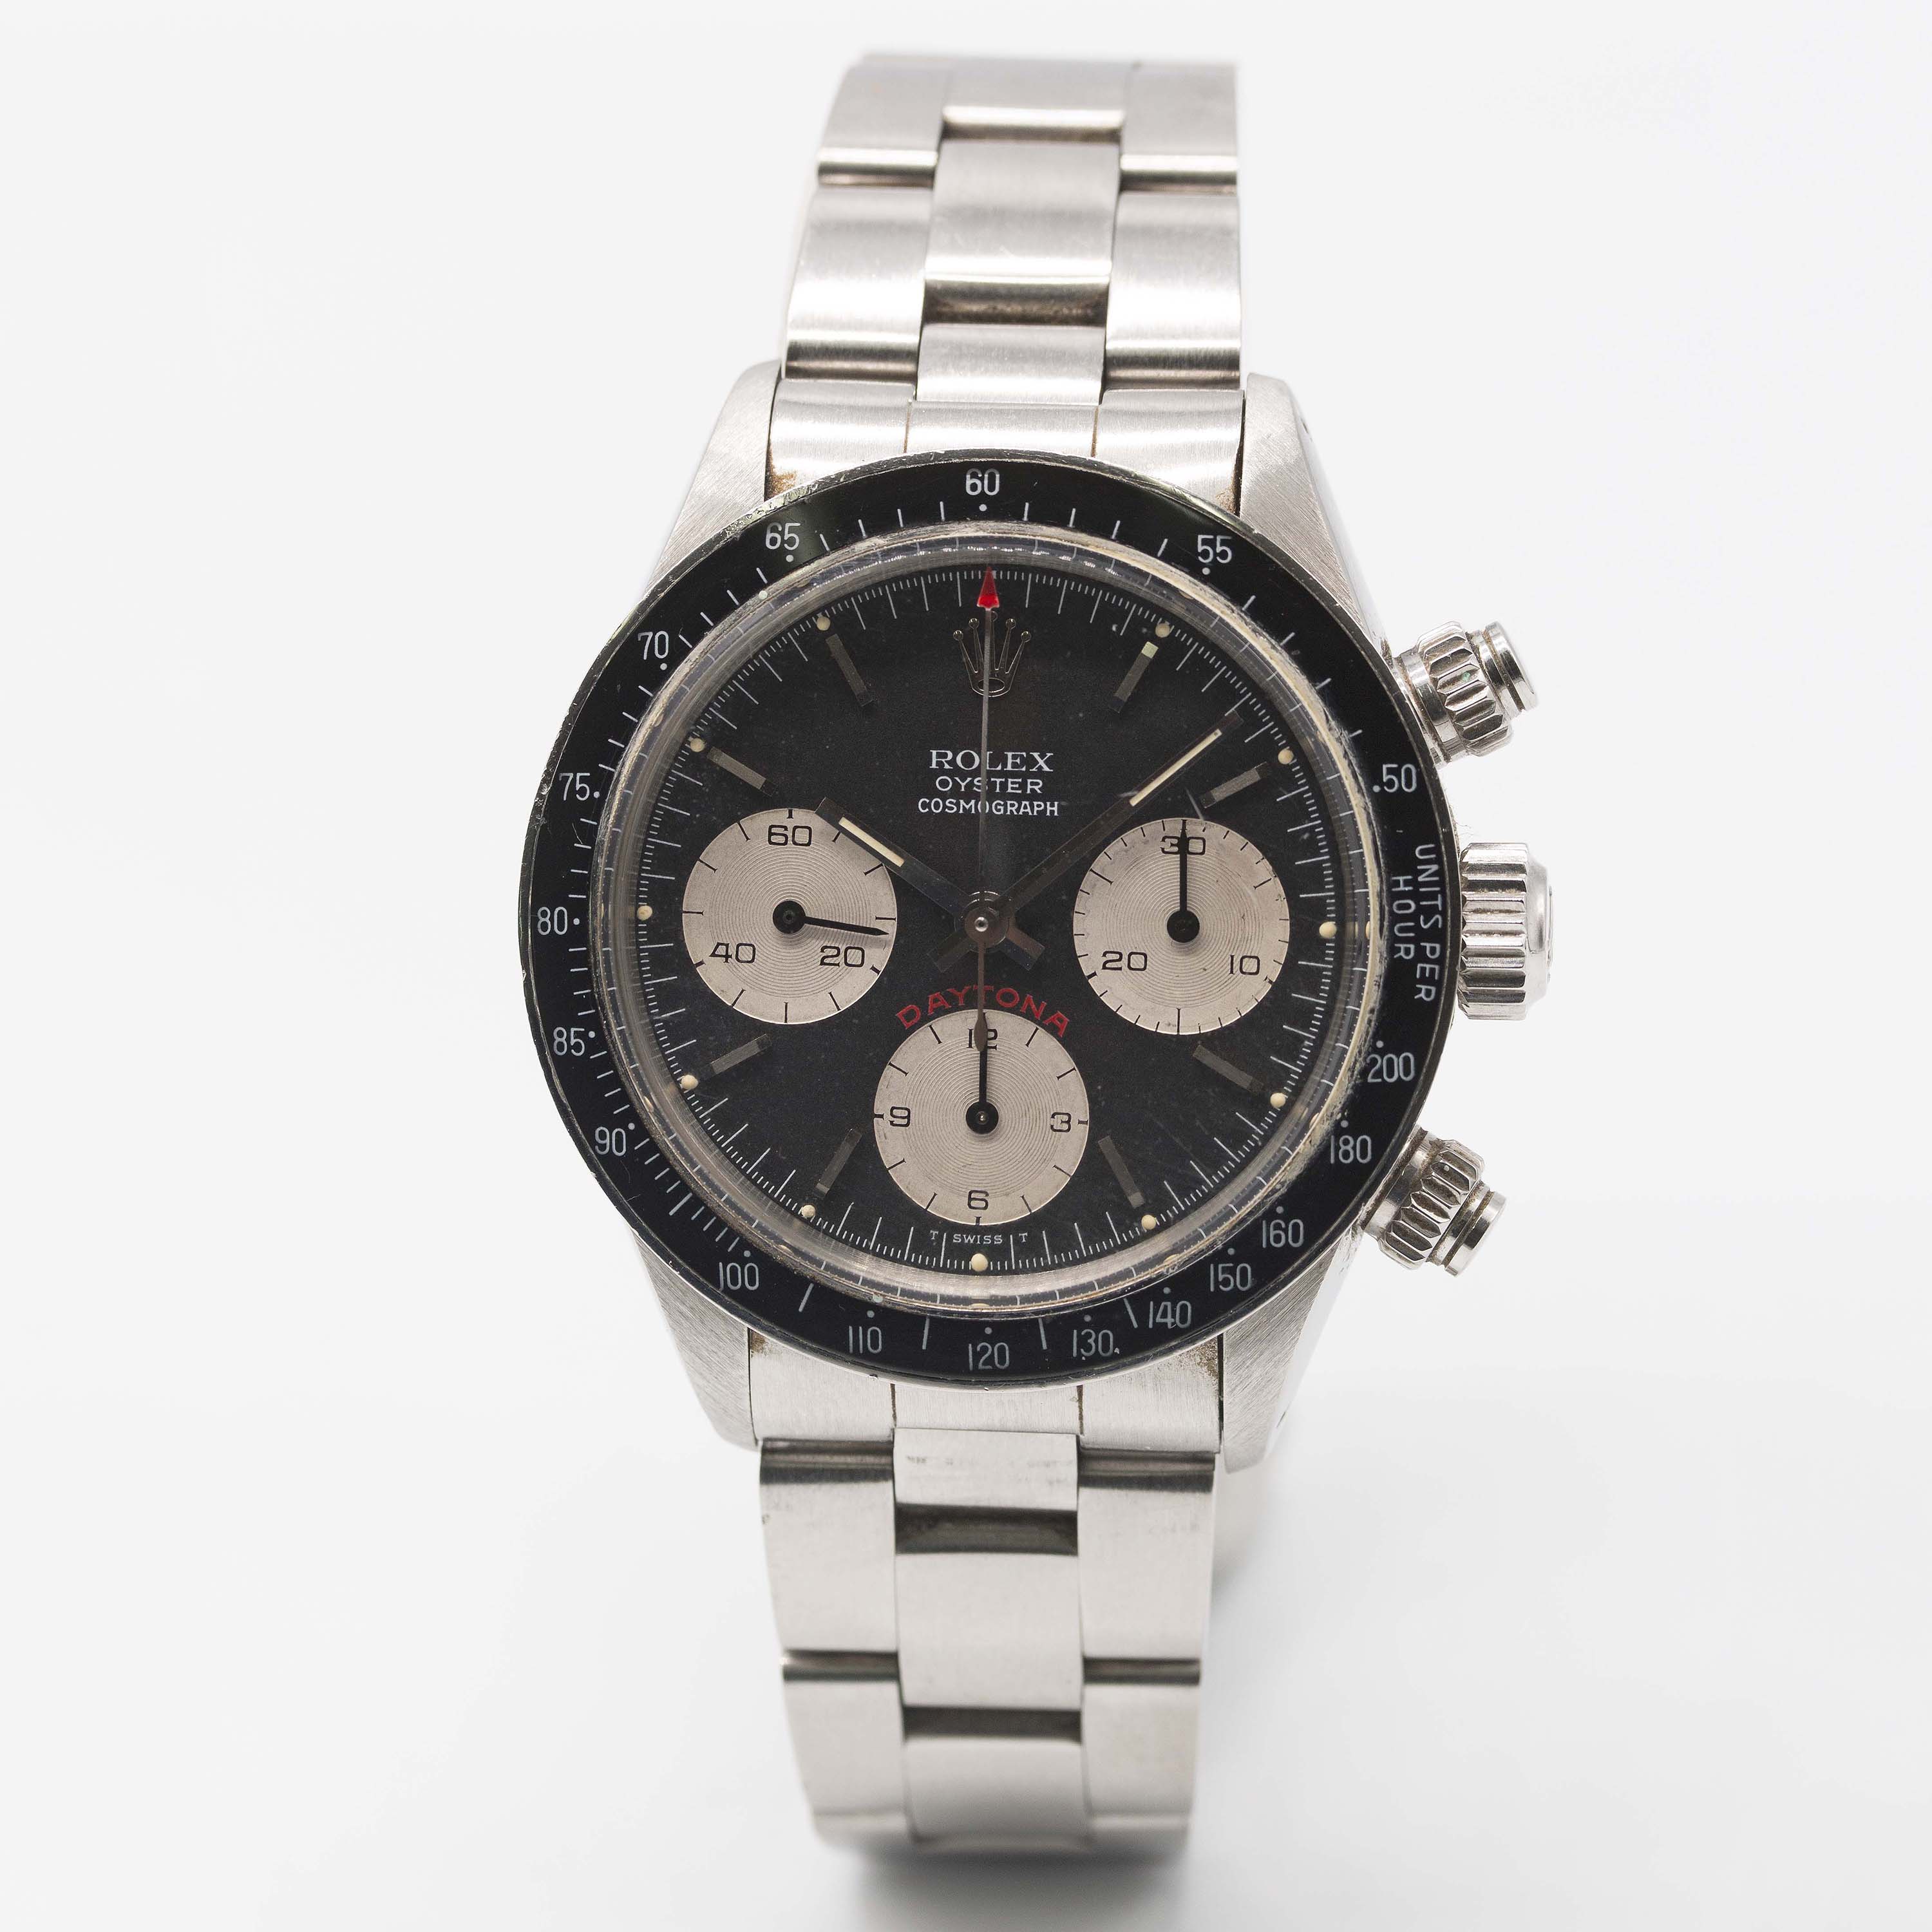 A VERY RARE GENTLEMAN'S STAINLESS STEEL ROLEX OYSTER COSMOGRAPH DAYTONA BRACELET WATCH CIRCA 1979, - Image 3 of 12